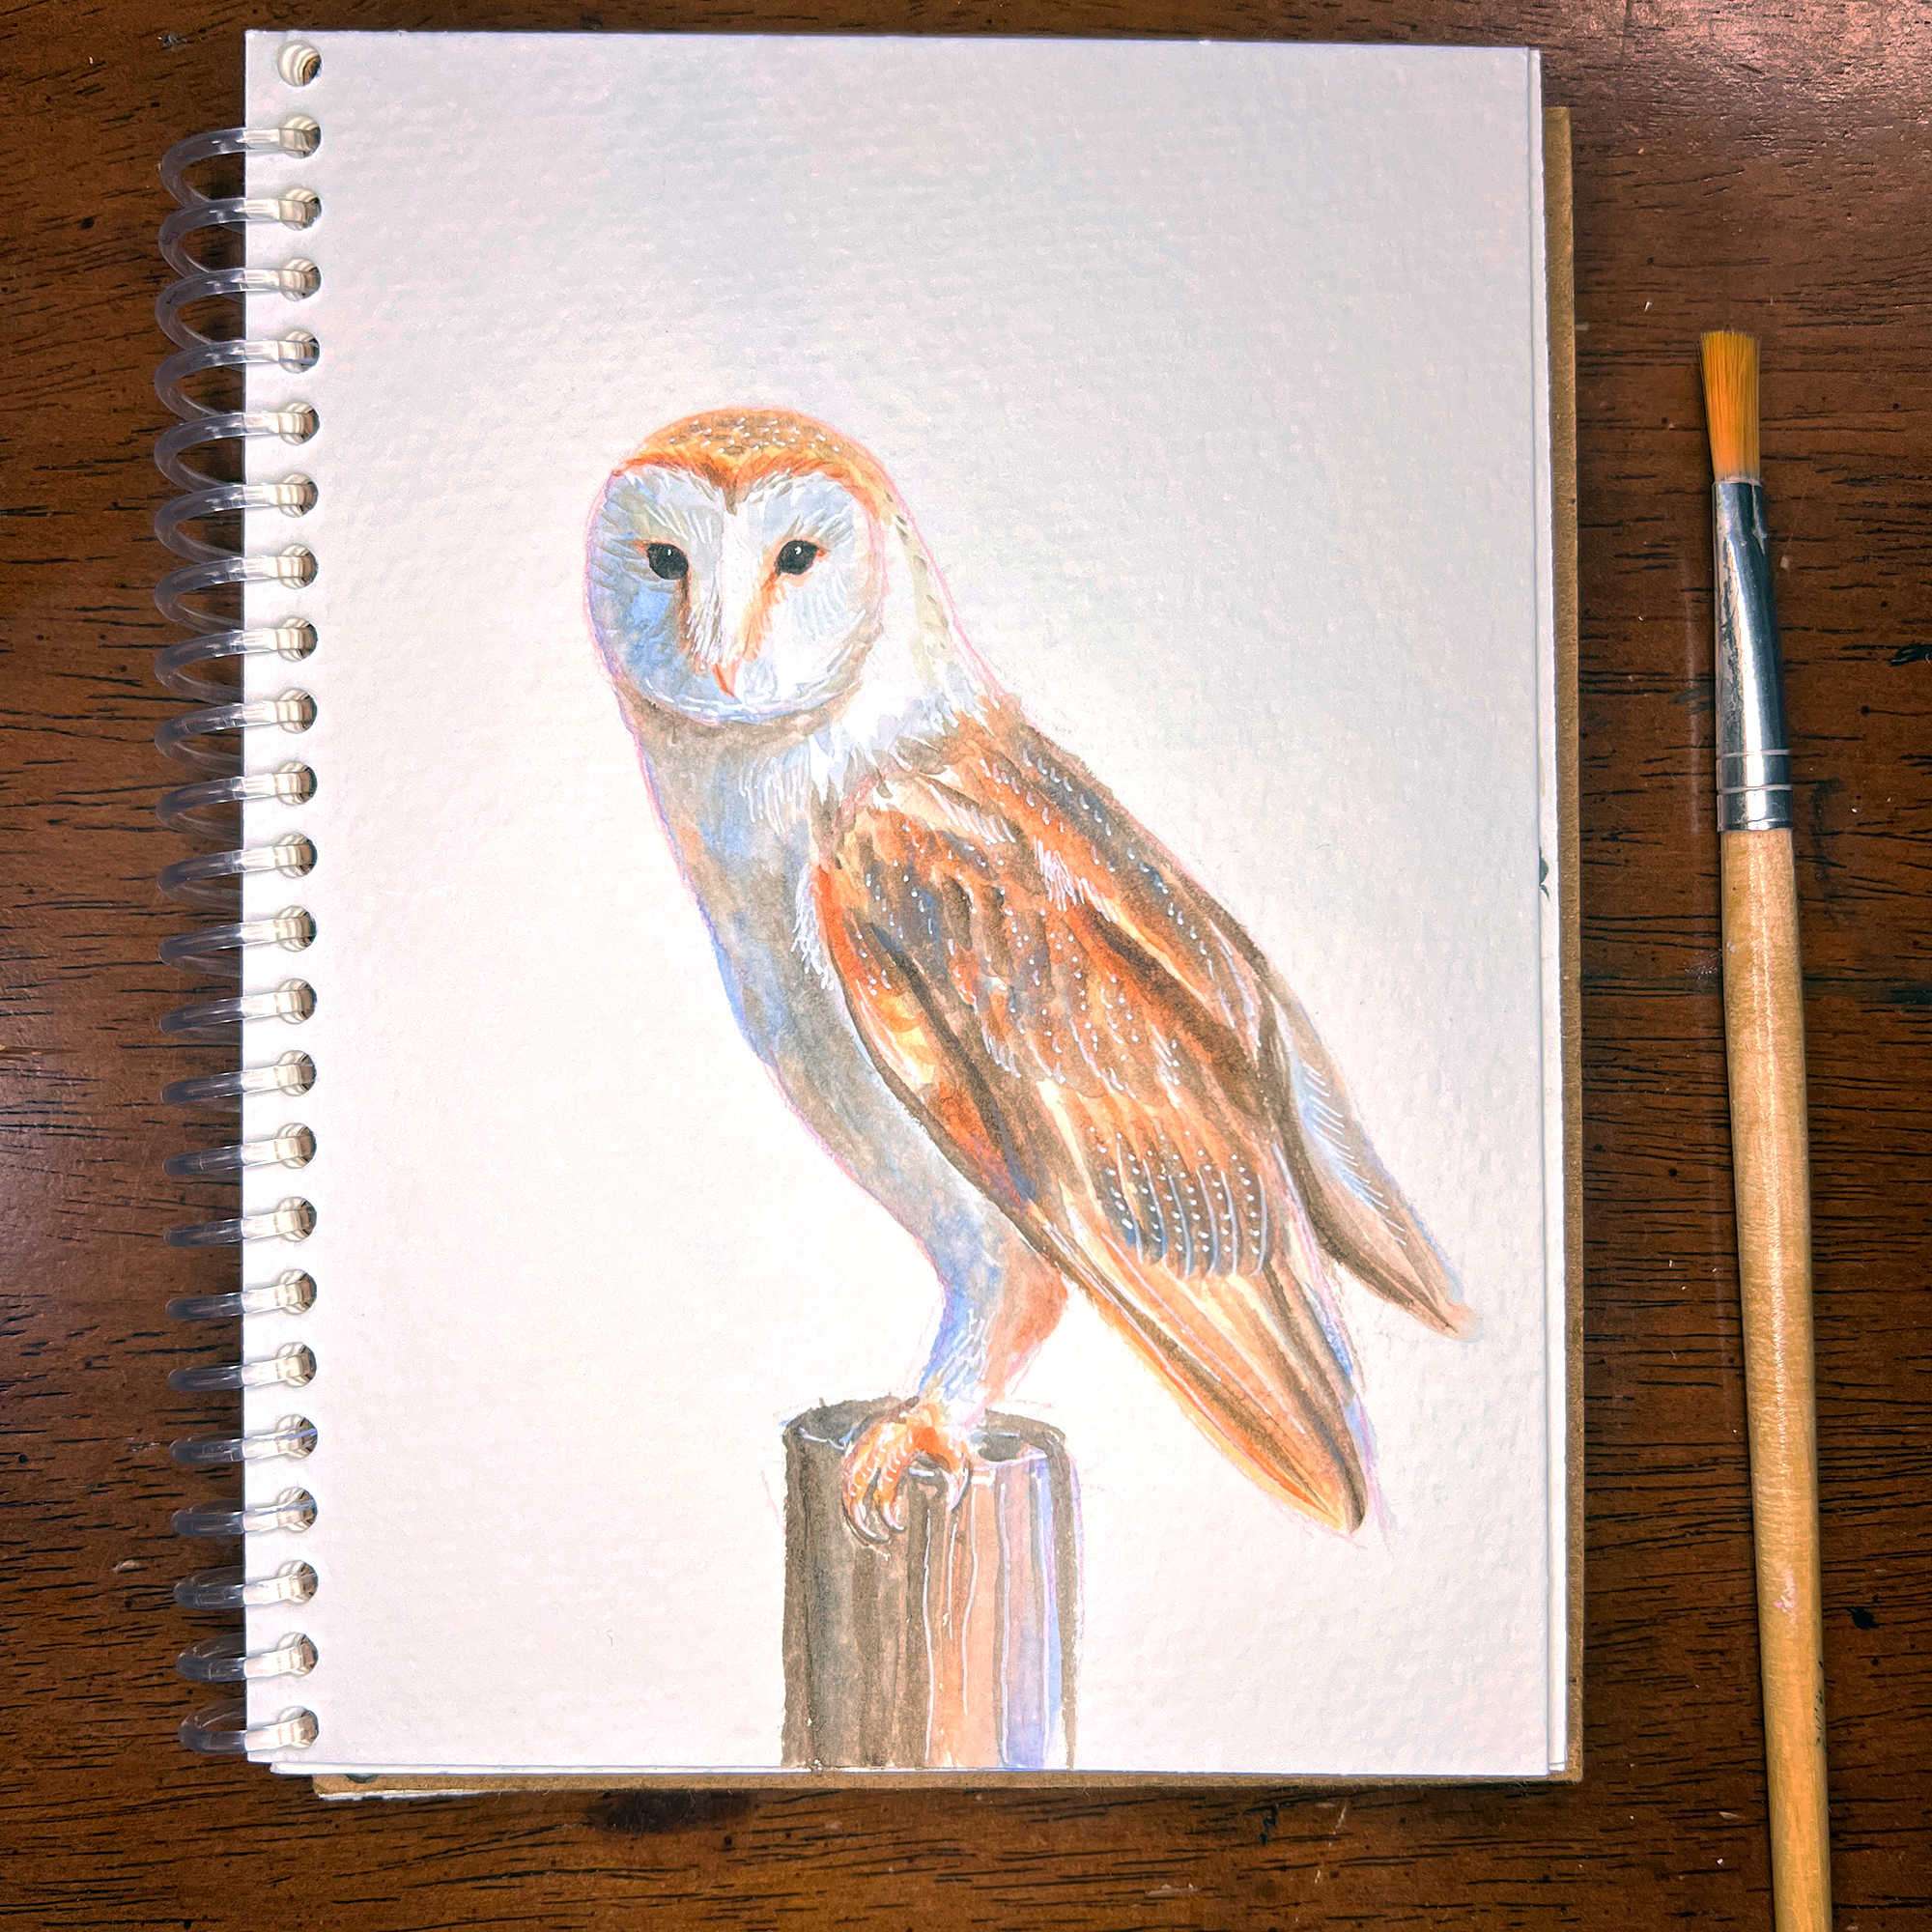 Sketchbook with barn owl painting and a paintbrush on a wood table.